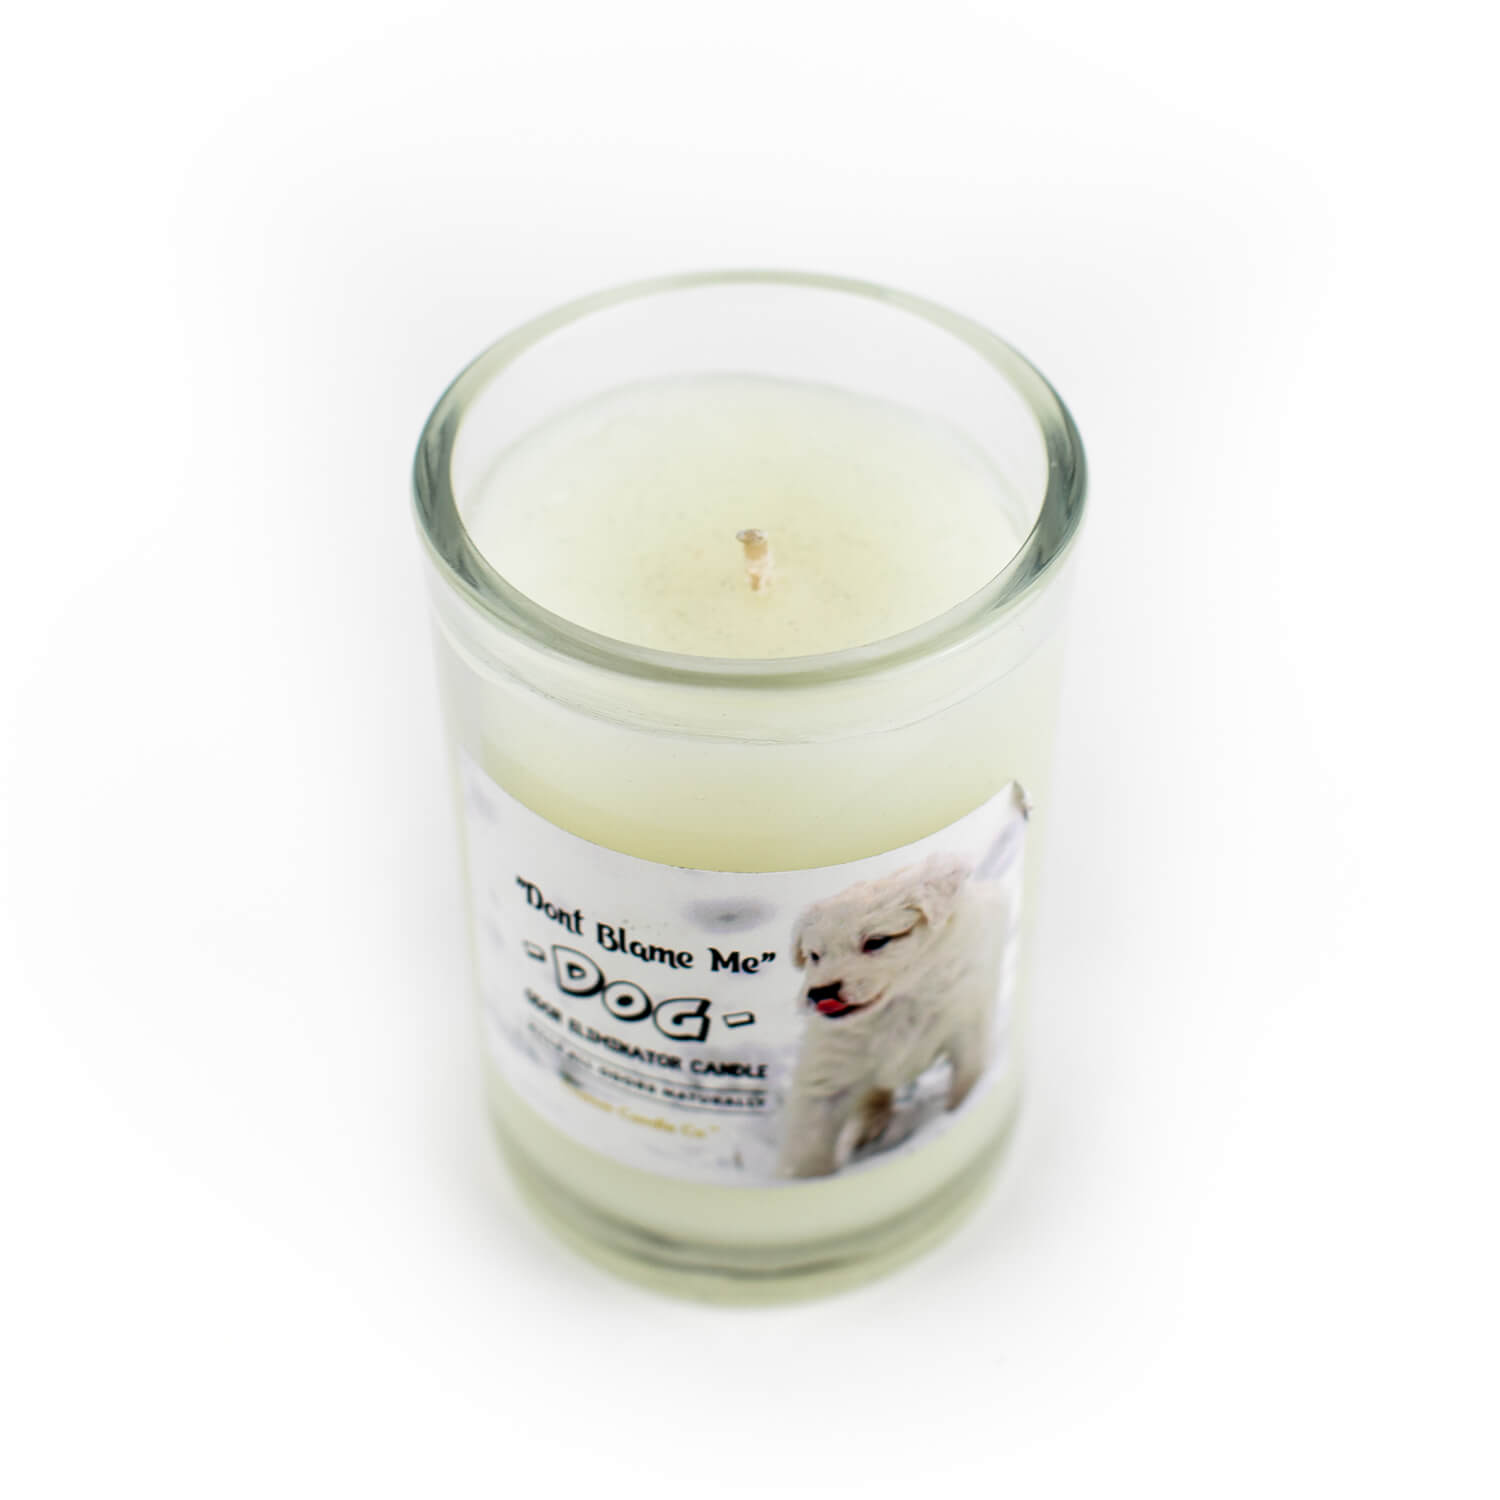 A "Don't Blame Me" small Dog Candle Odor Eliminator with a picture of a dog on it.